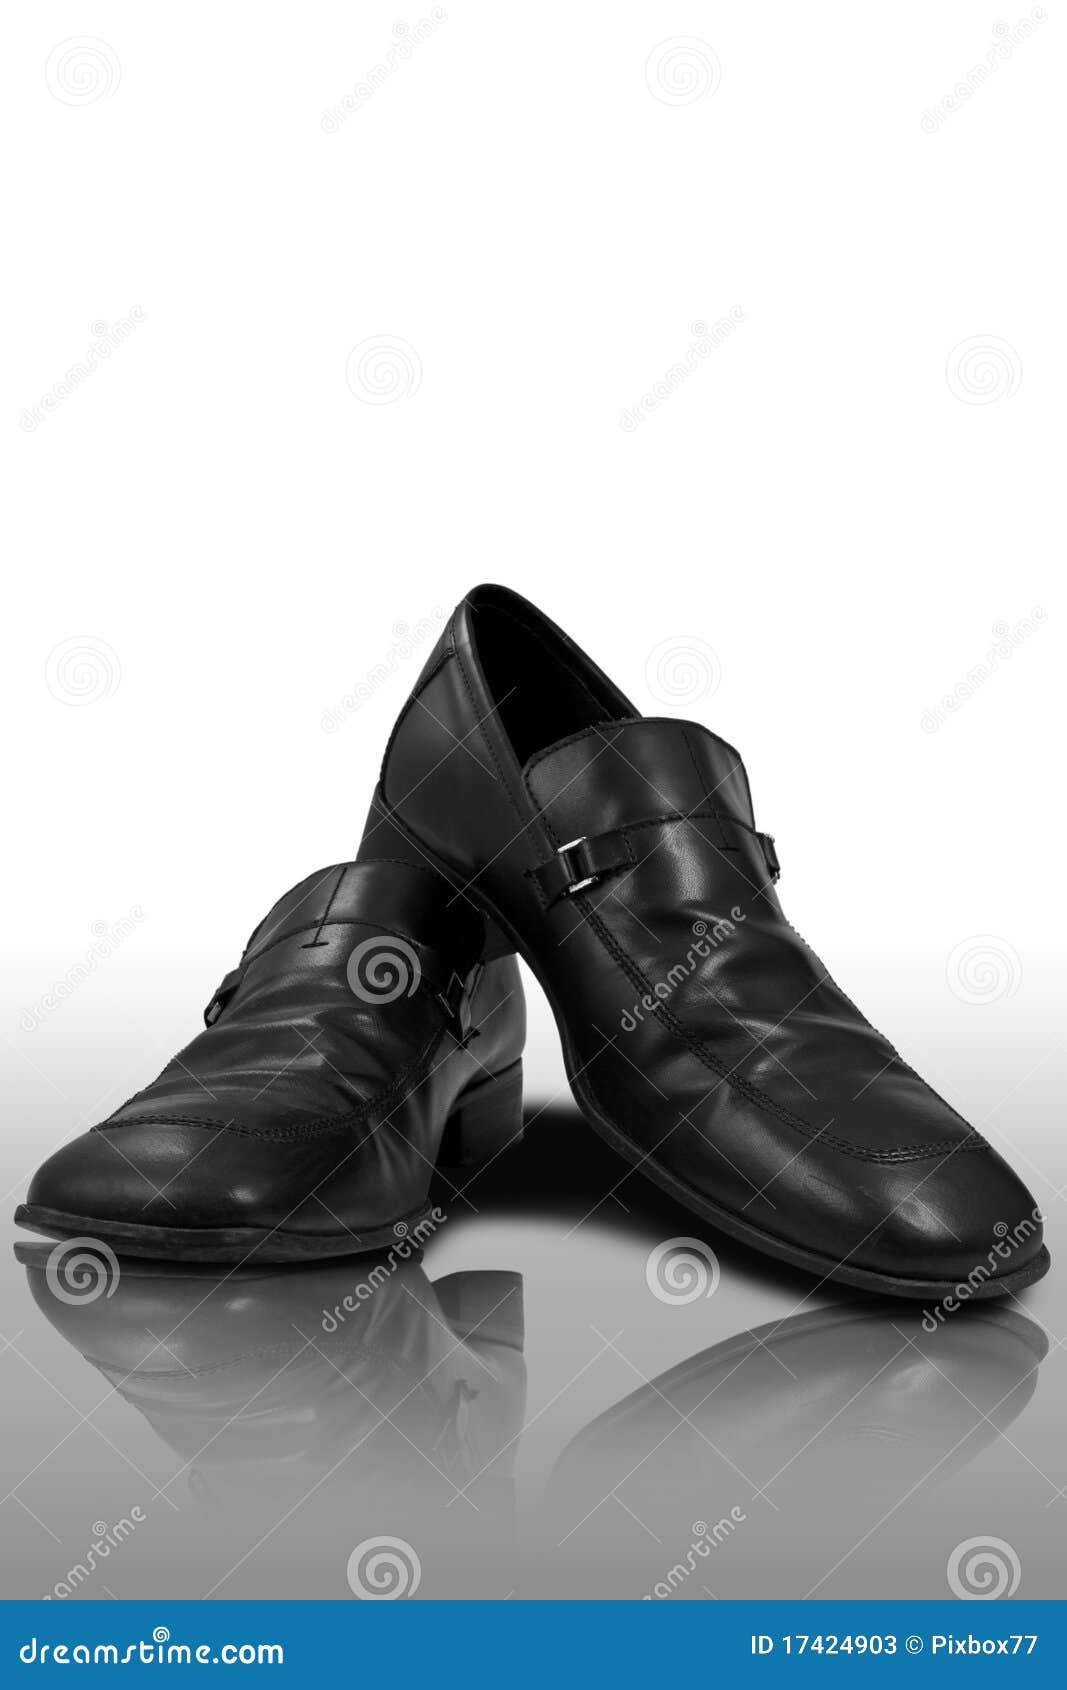 Shoes on reflected floor stock image. Image of garb, black - 17424903